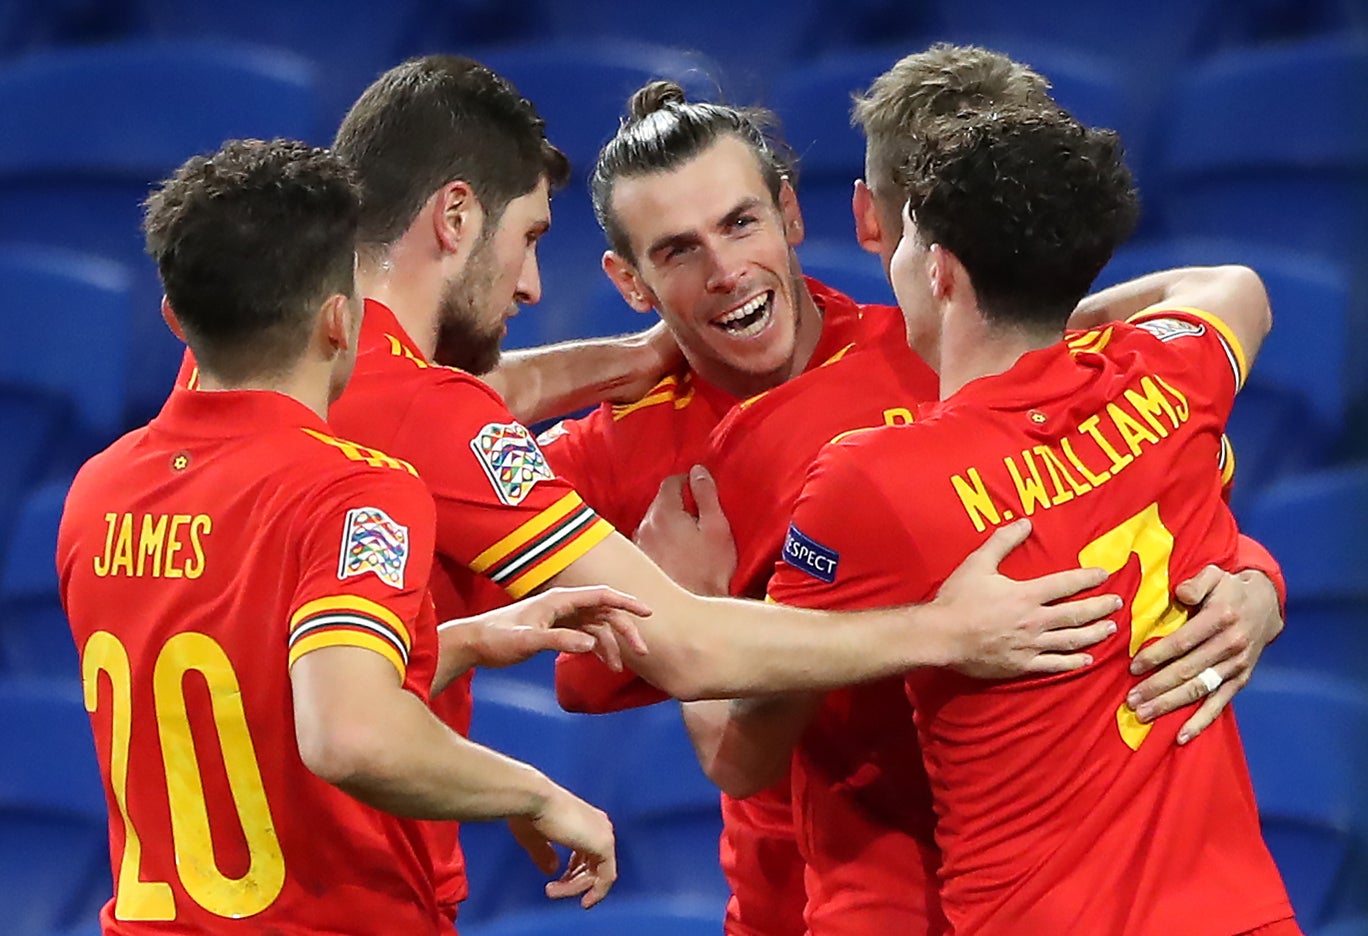 Wales players celebrate a goal